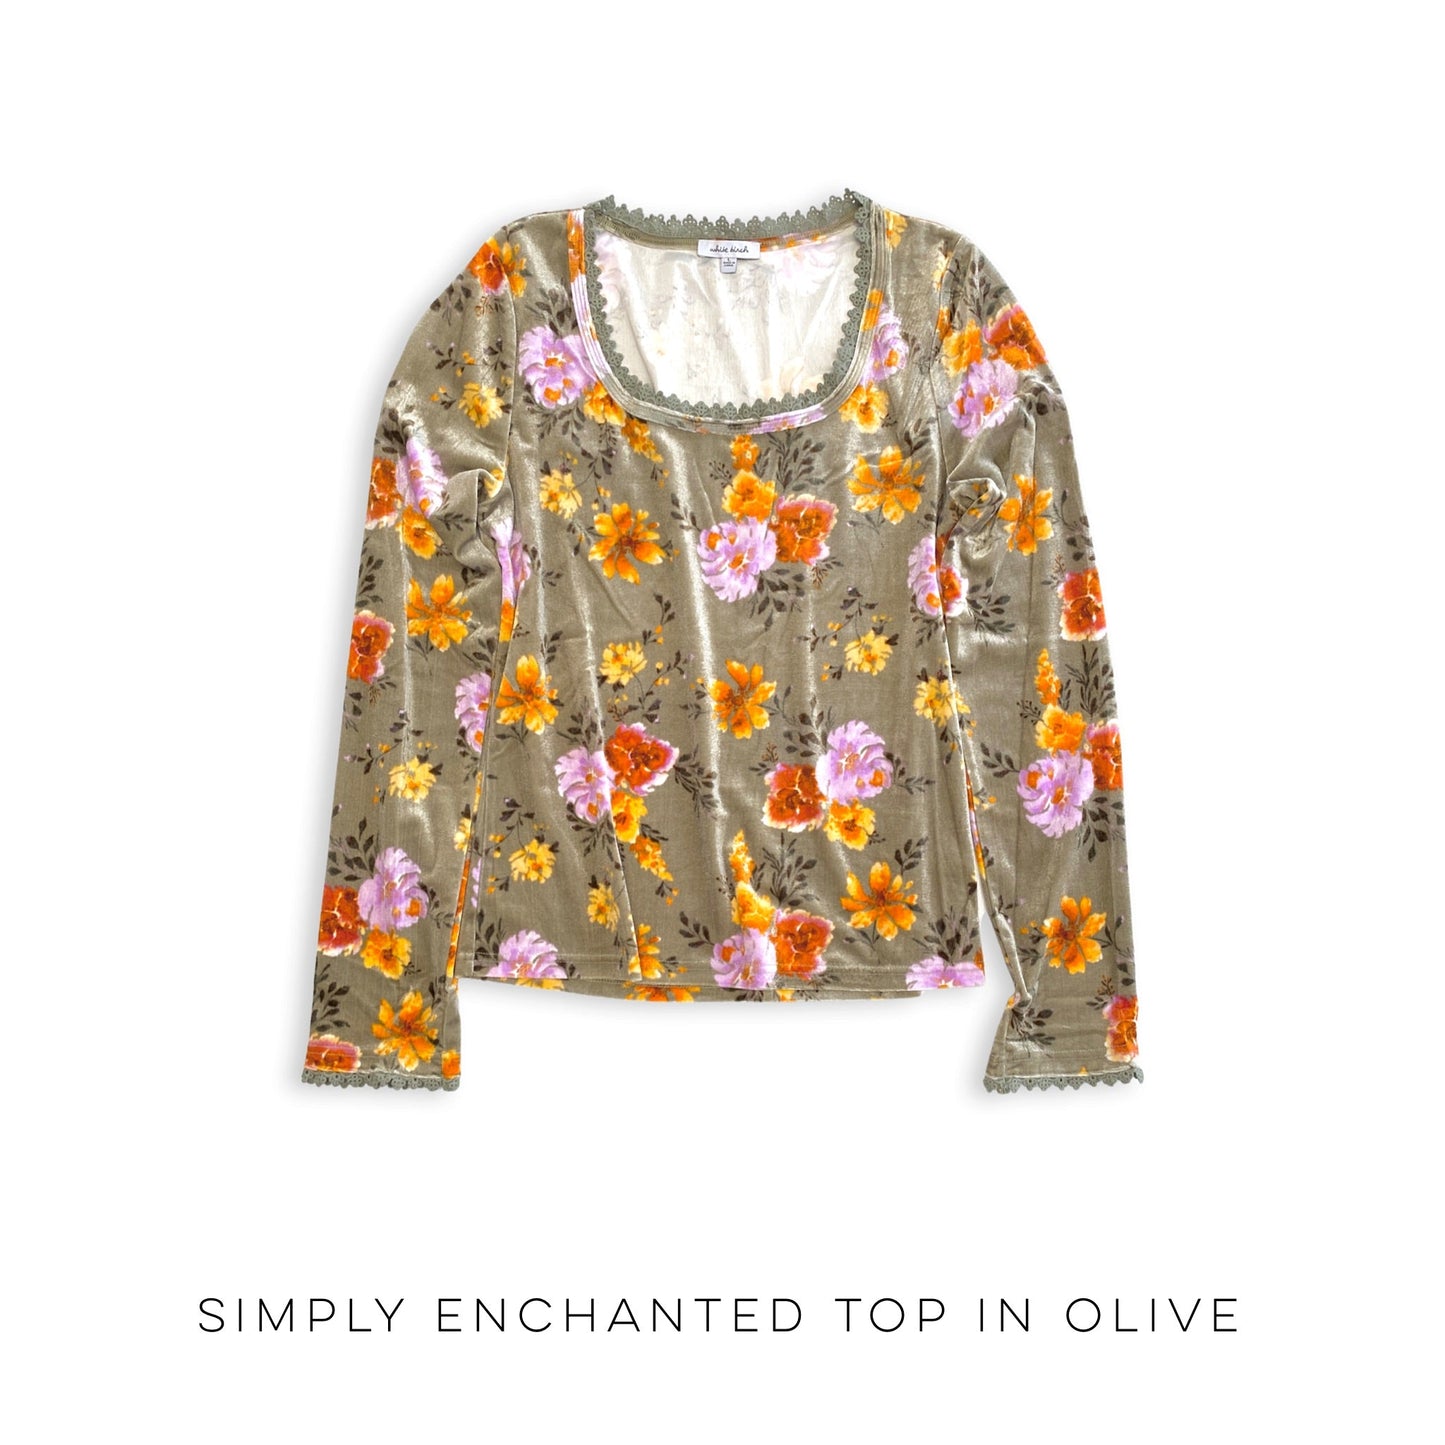 Simply Enchanted Top in Olive